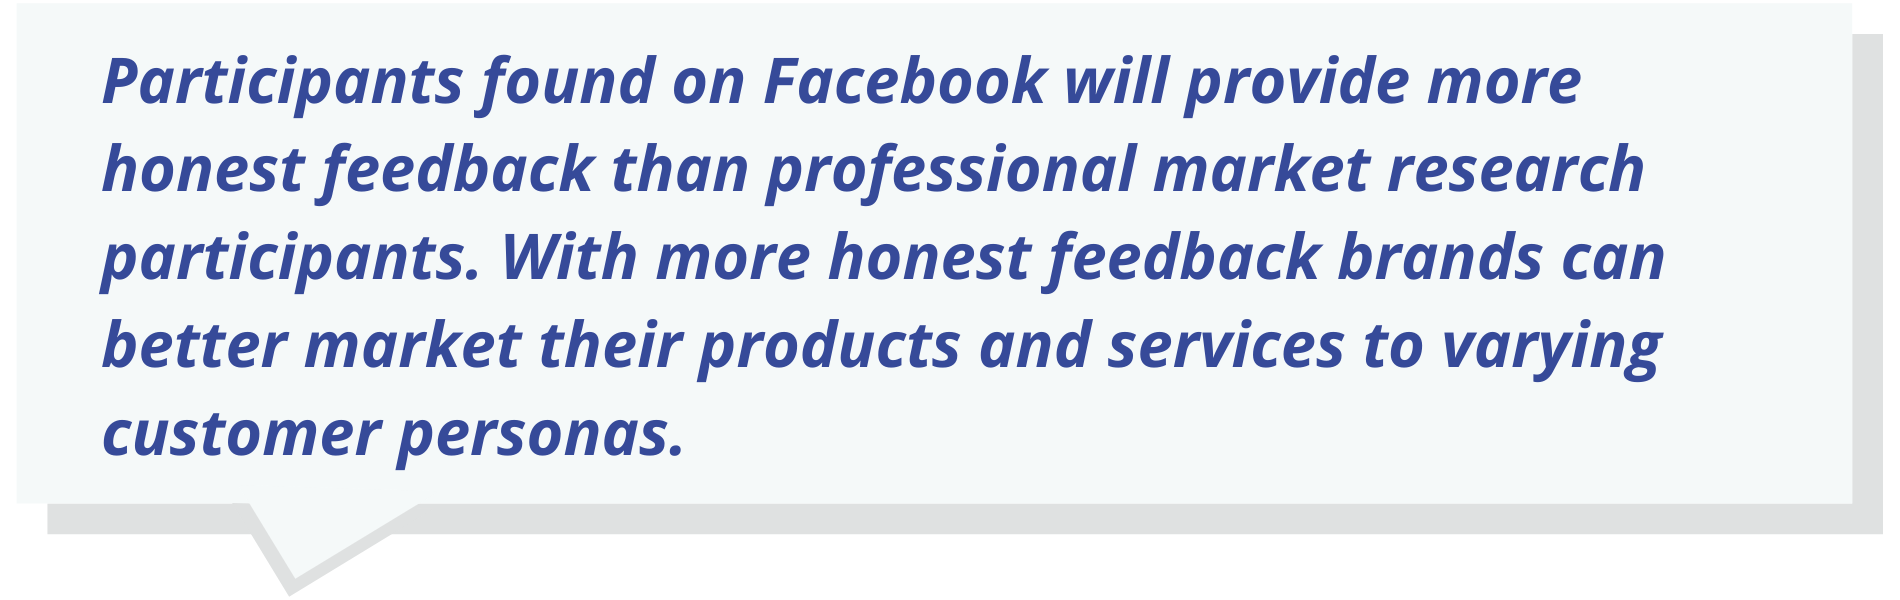 Participants found on Facebook will provide more honest feedback than professional market research participants. With more honest feedback brands can better market their products and services to varying customer personas.